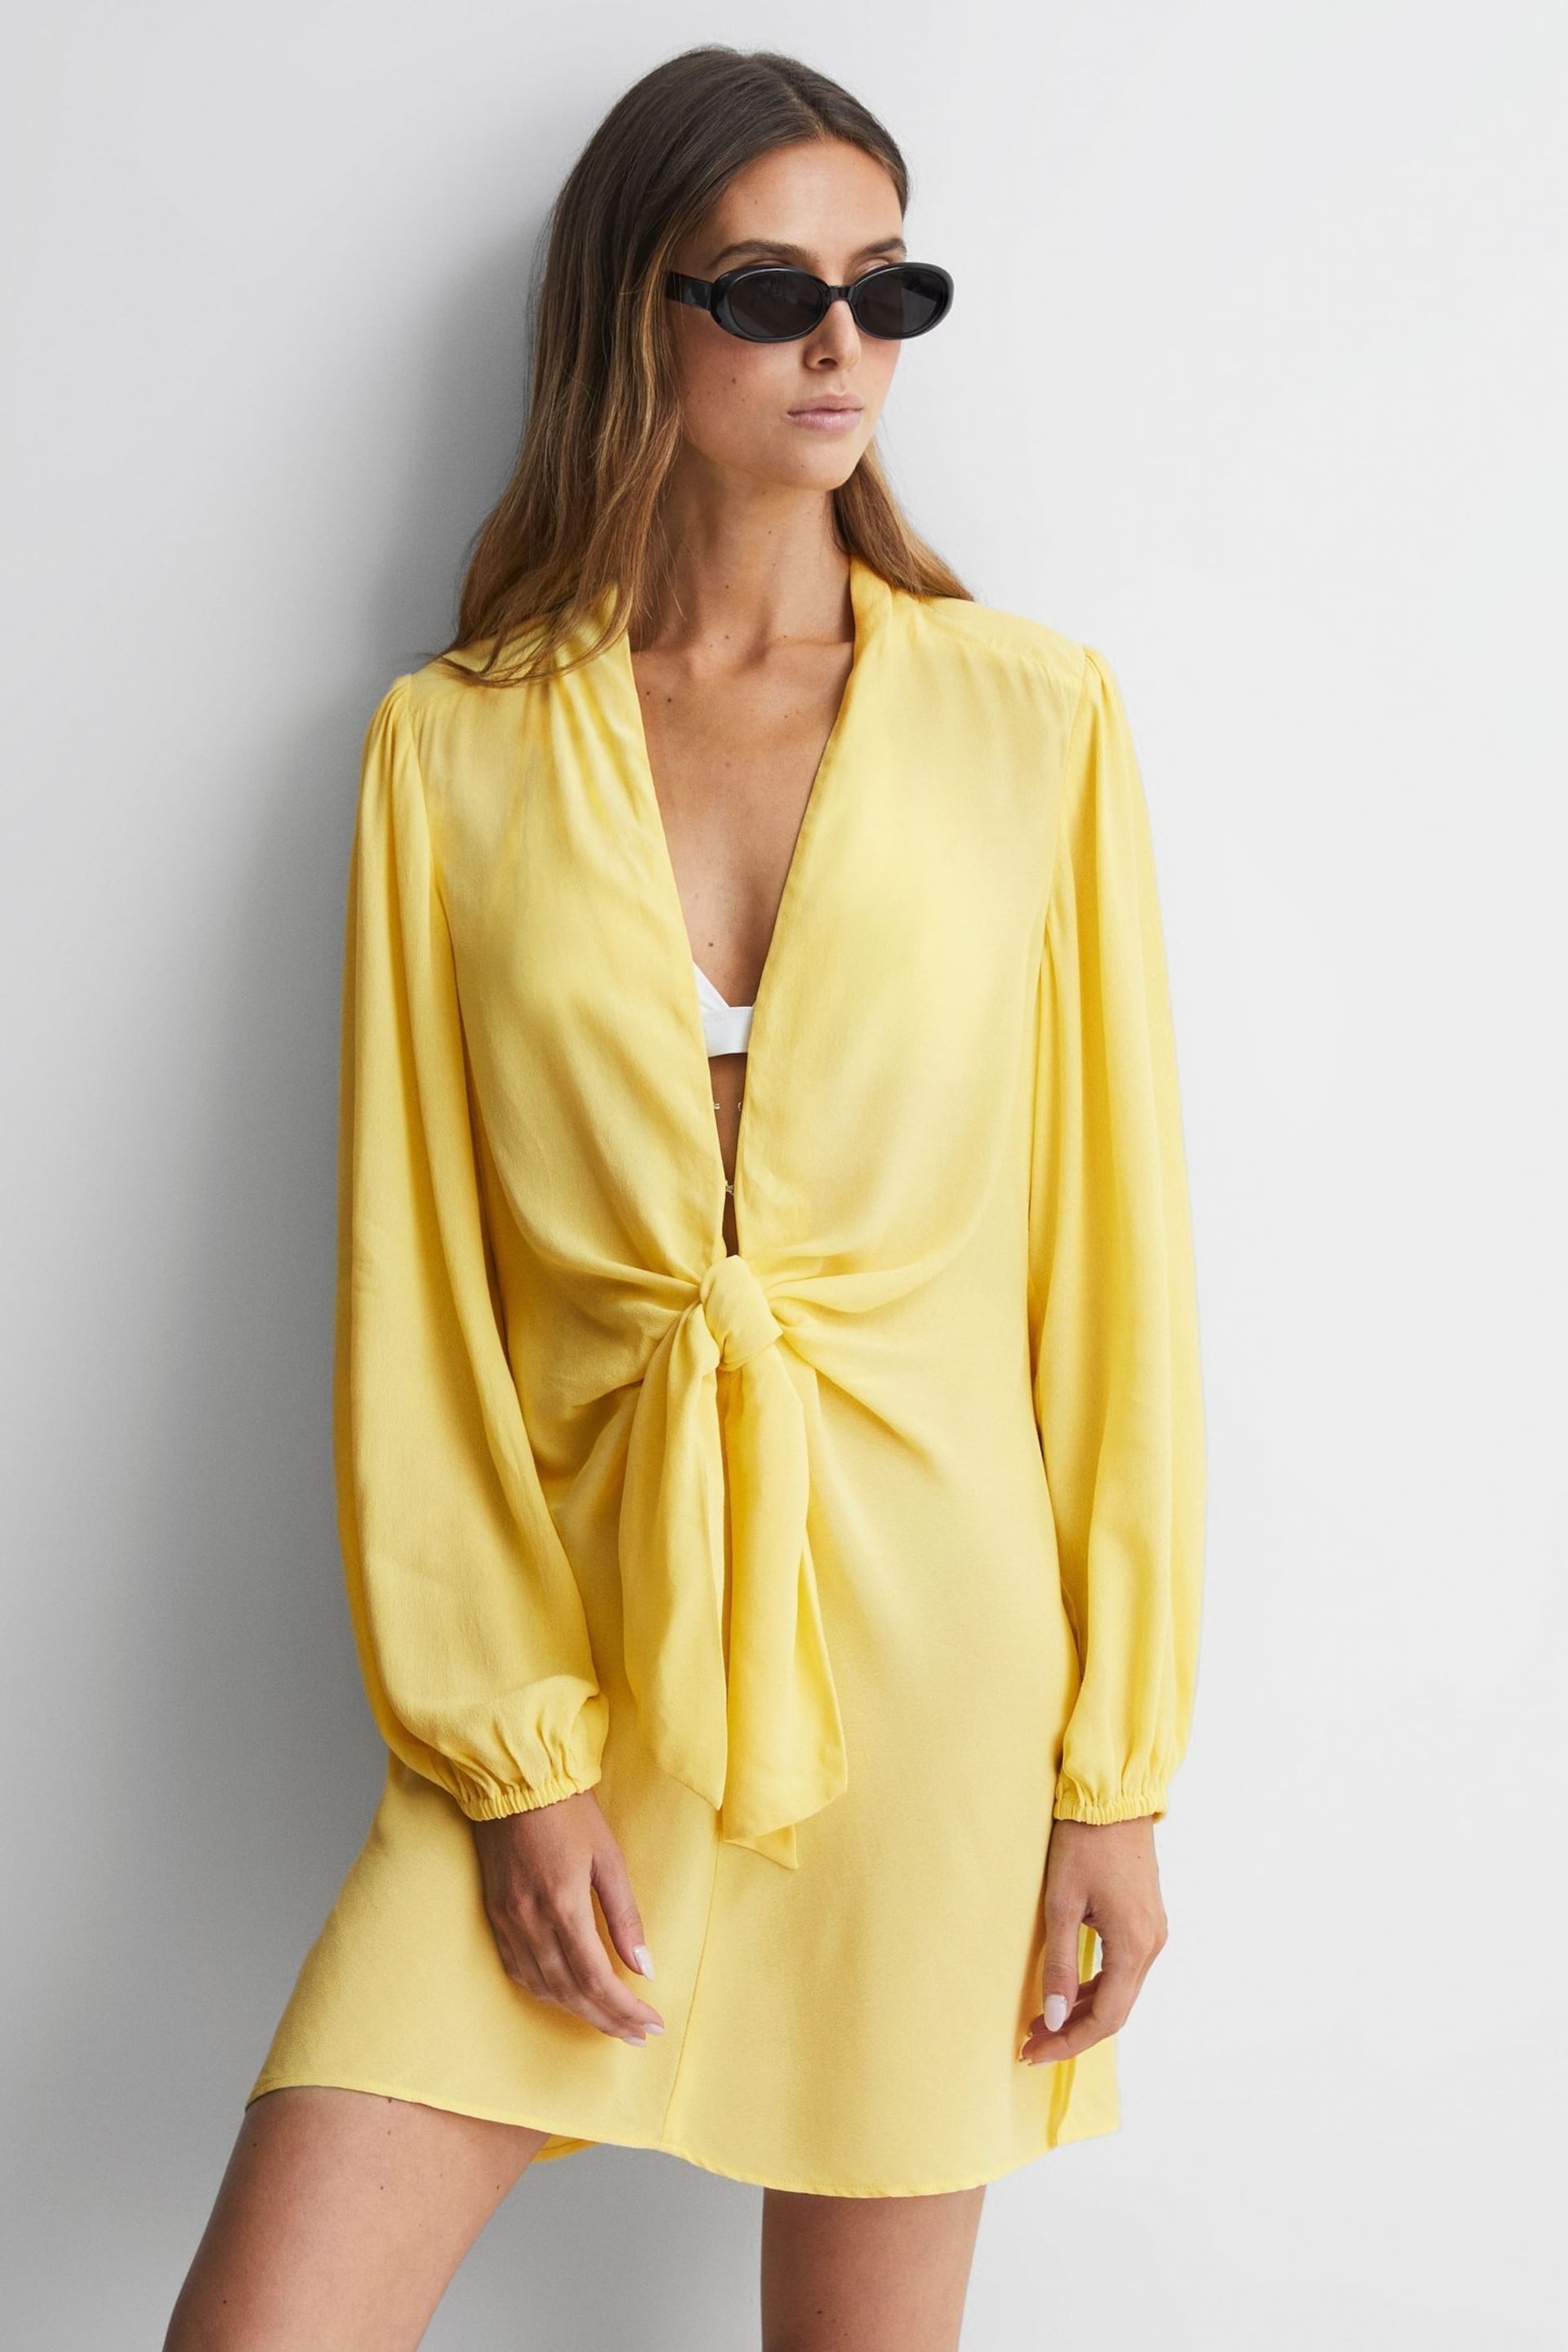 Reiss Yellow Mabel Tie Front Mini Dress - Image 4 of 5